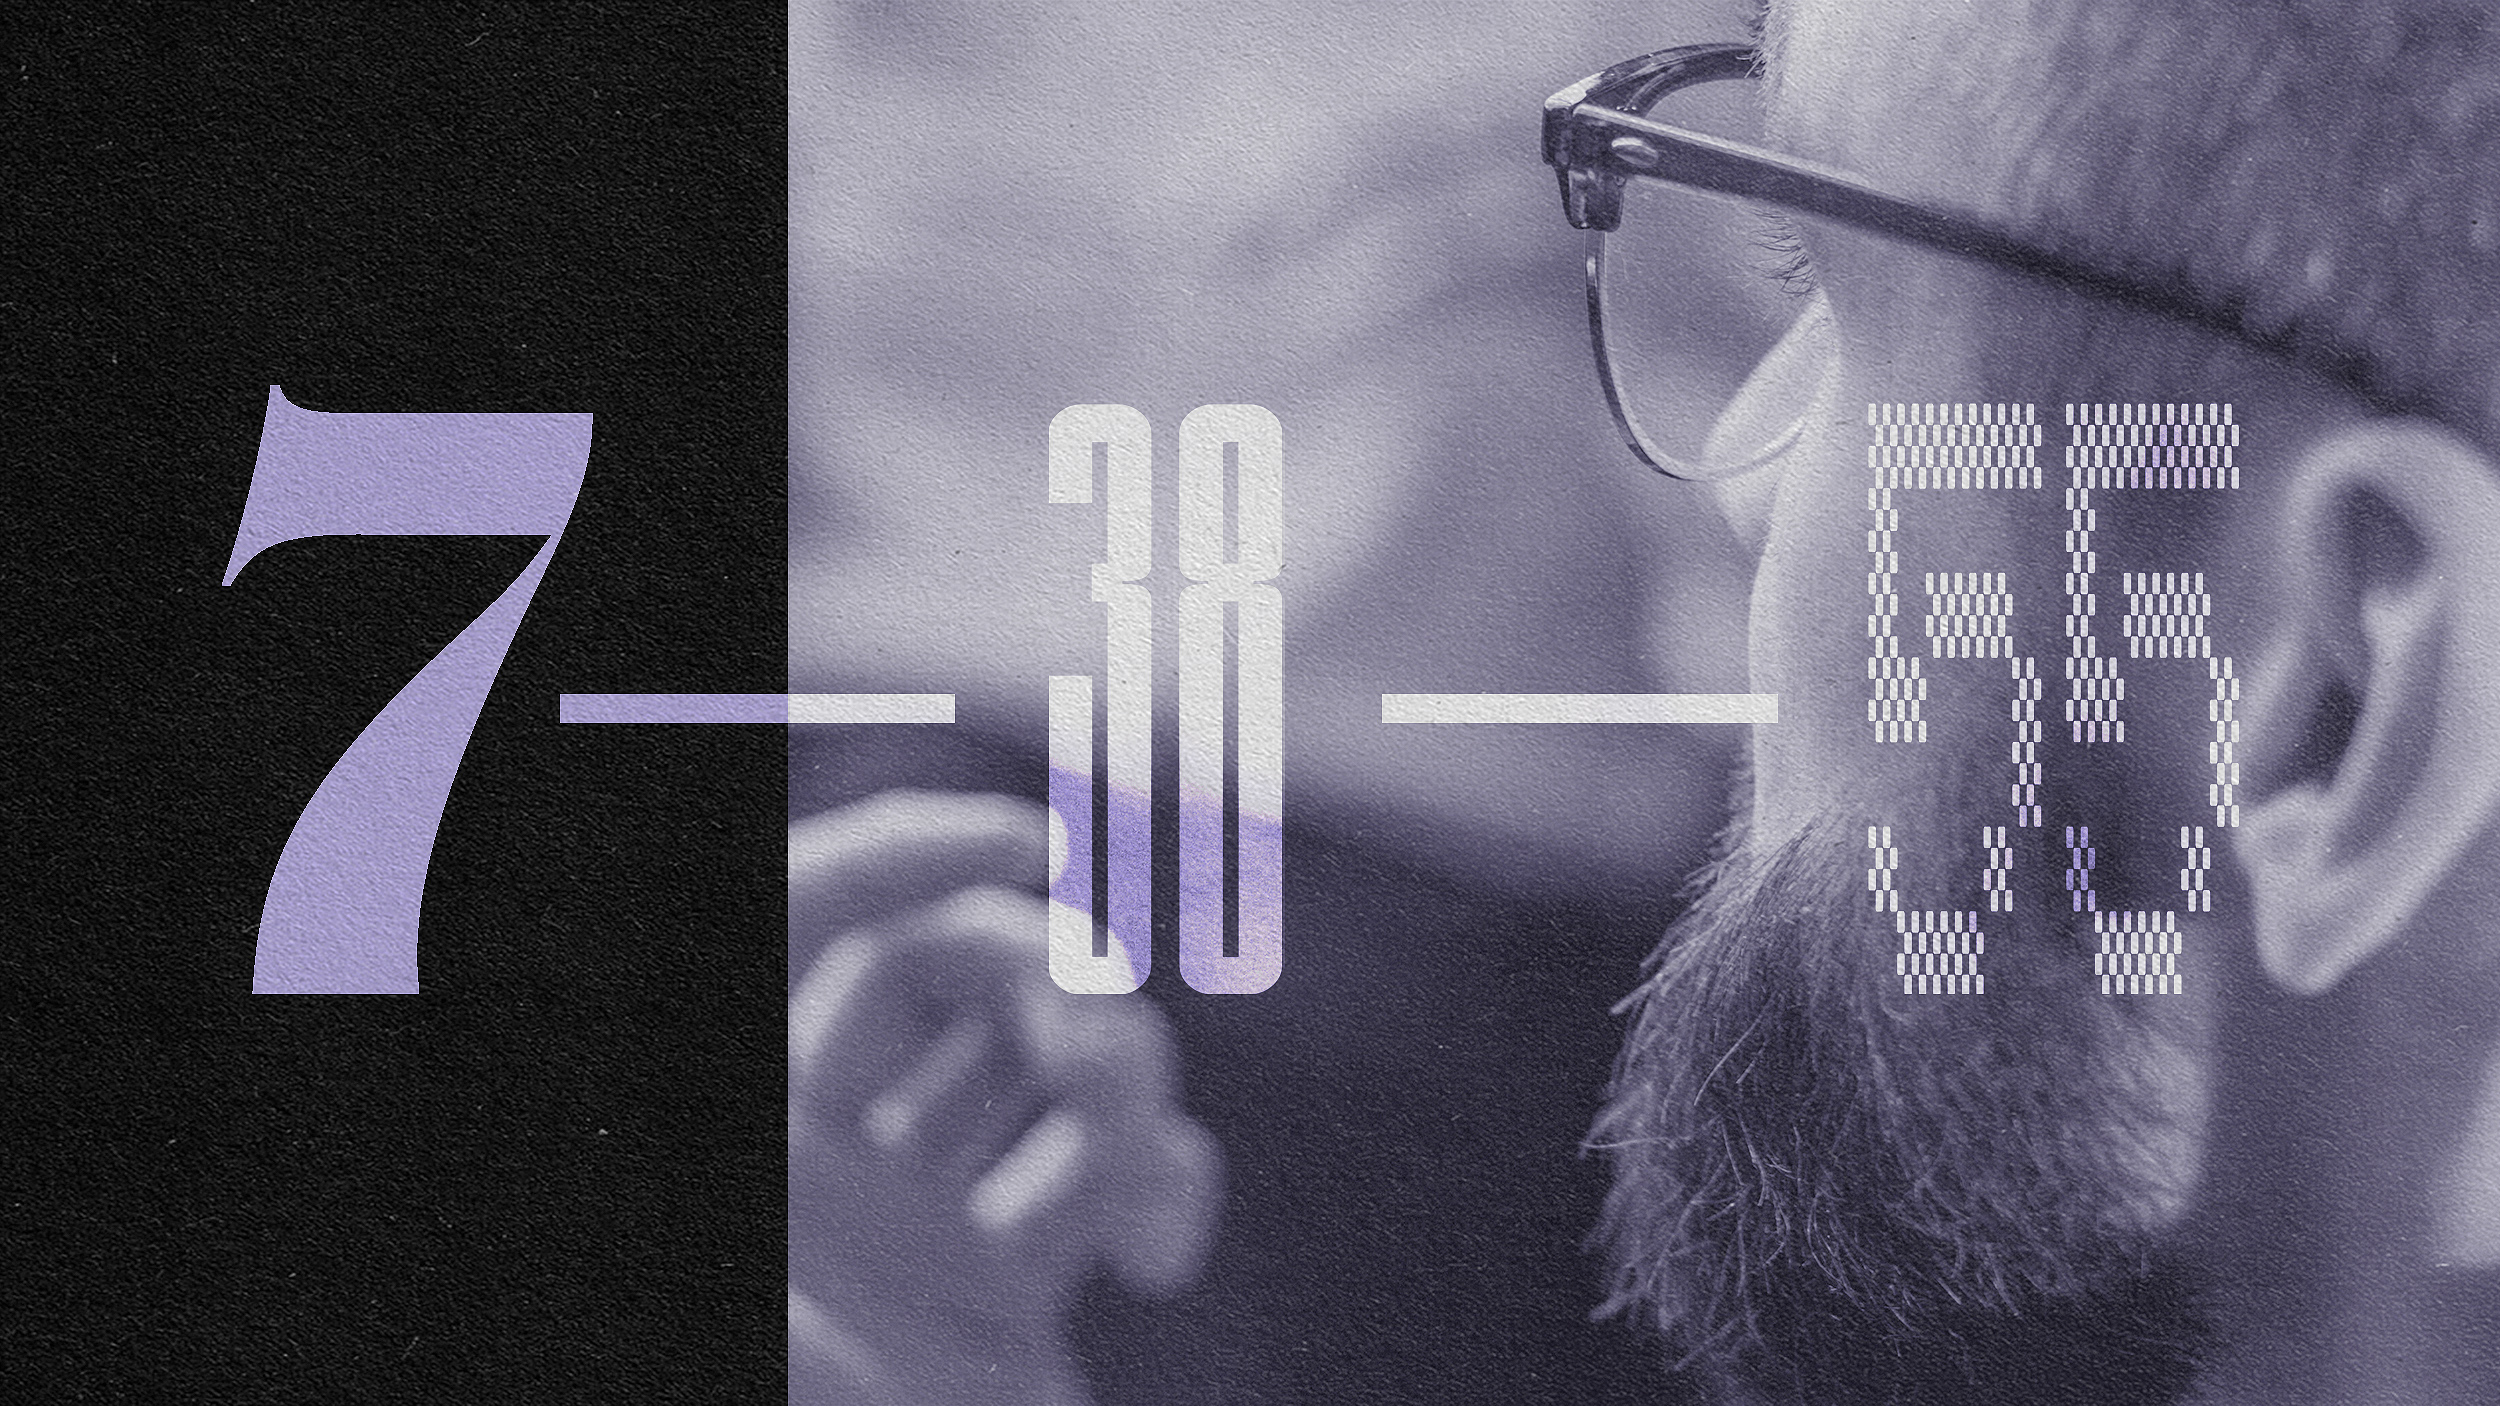 Close-up of a person's beard and glasses on the right side with numbers "7", "30", and "65" shown in varying typographical styles across the center, subtly referencing the 7-38-55 rule. The background is abstract with dark and light tones.